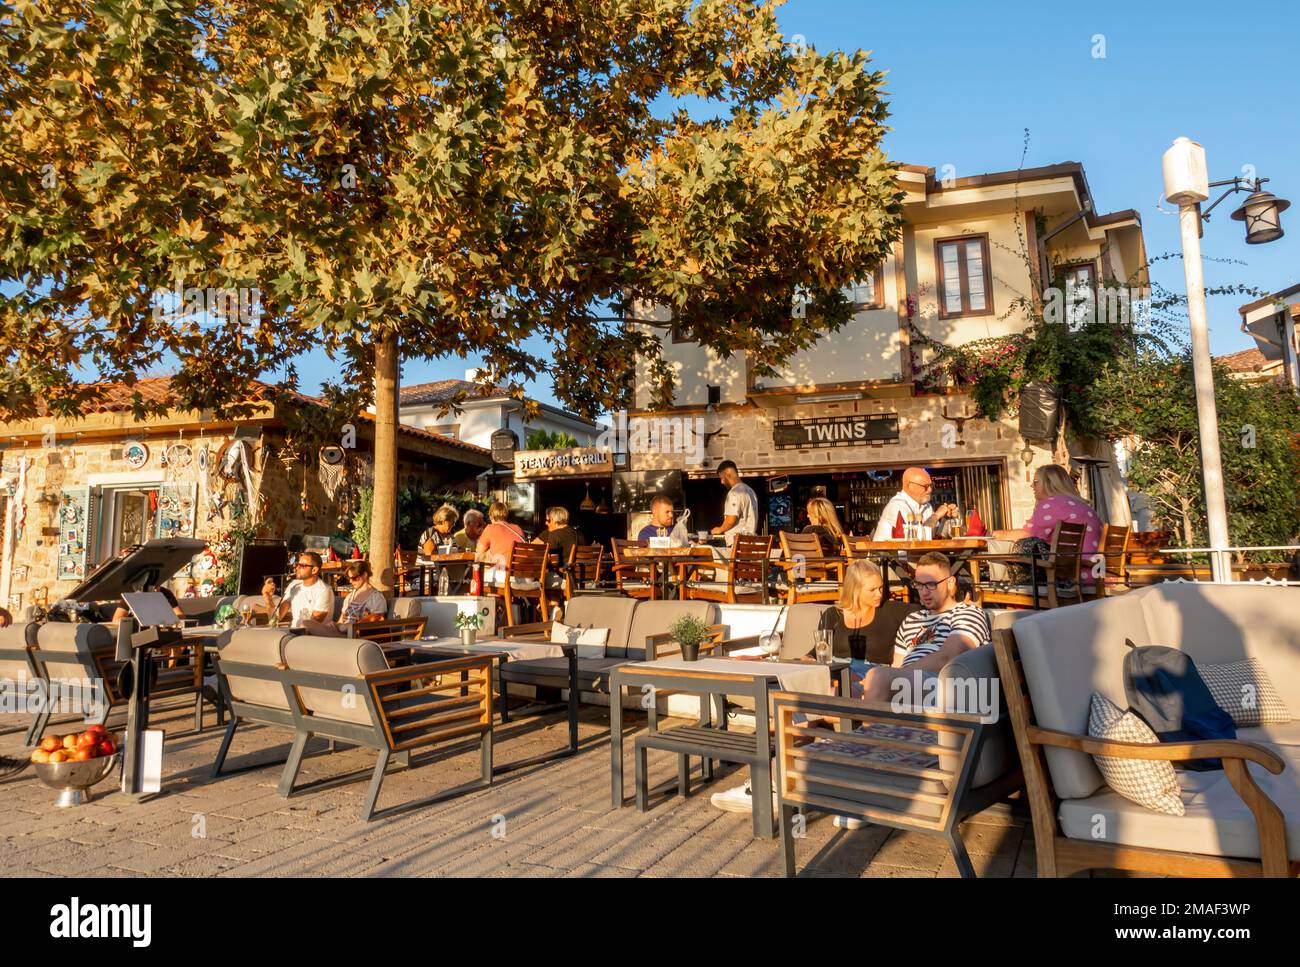 Antalya tourism. Tourists at the outdoor cafe in a resort town Side, Antalya, Turkey Stock Photo